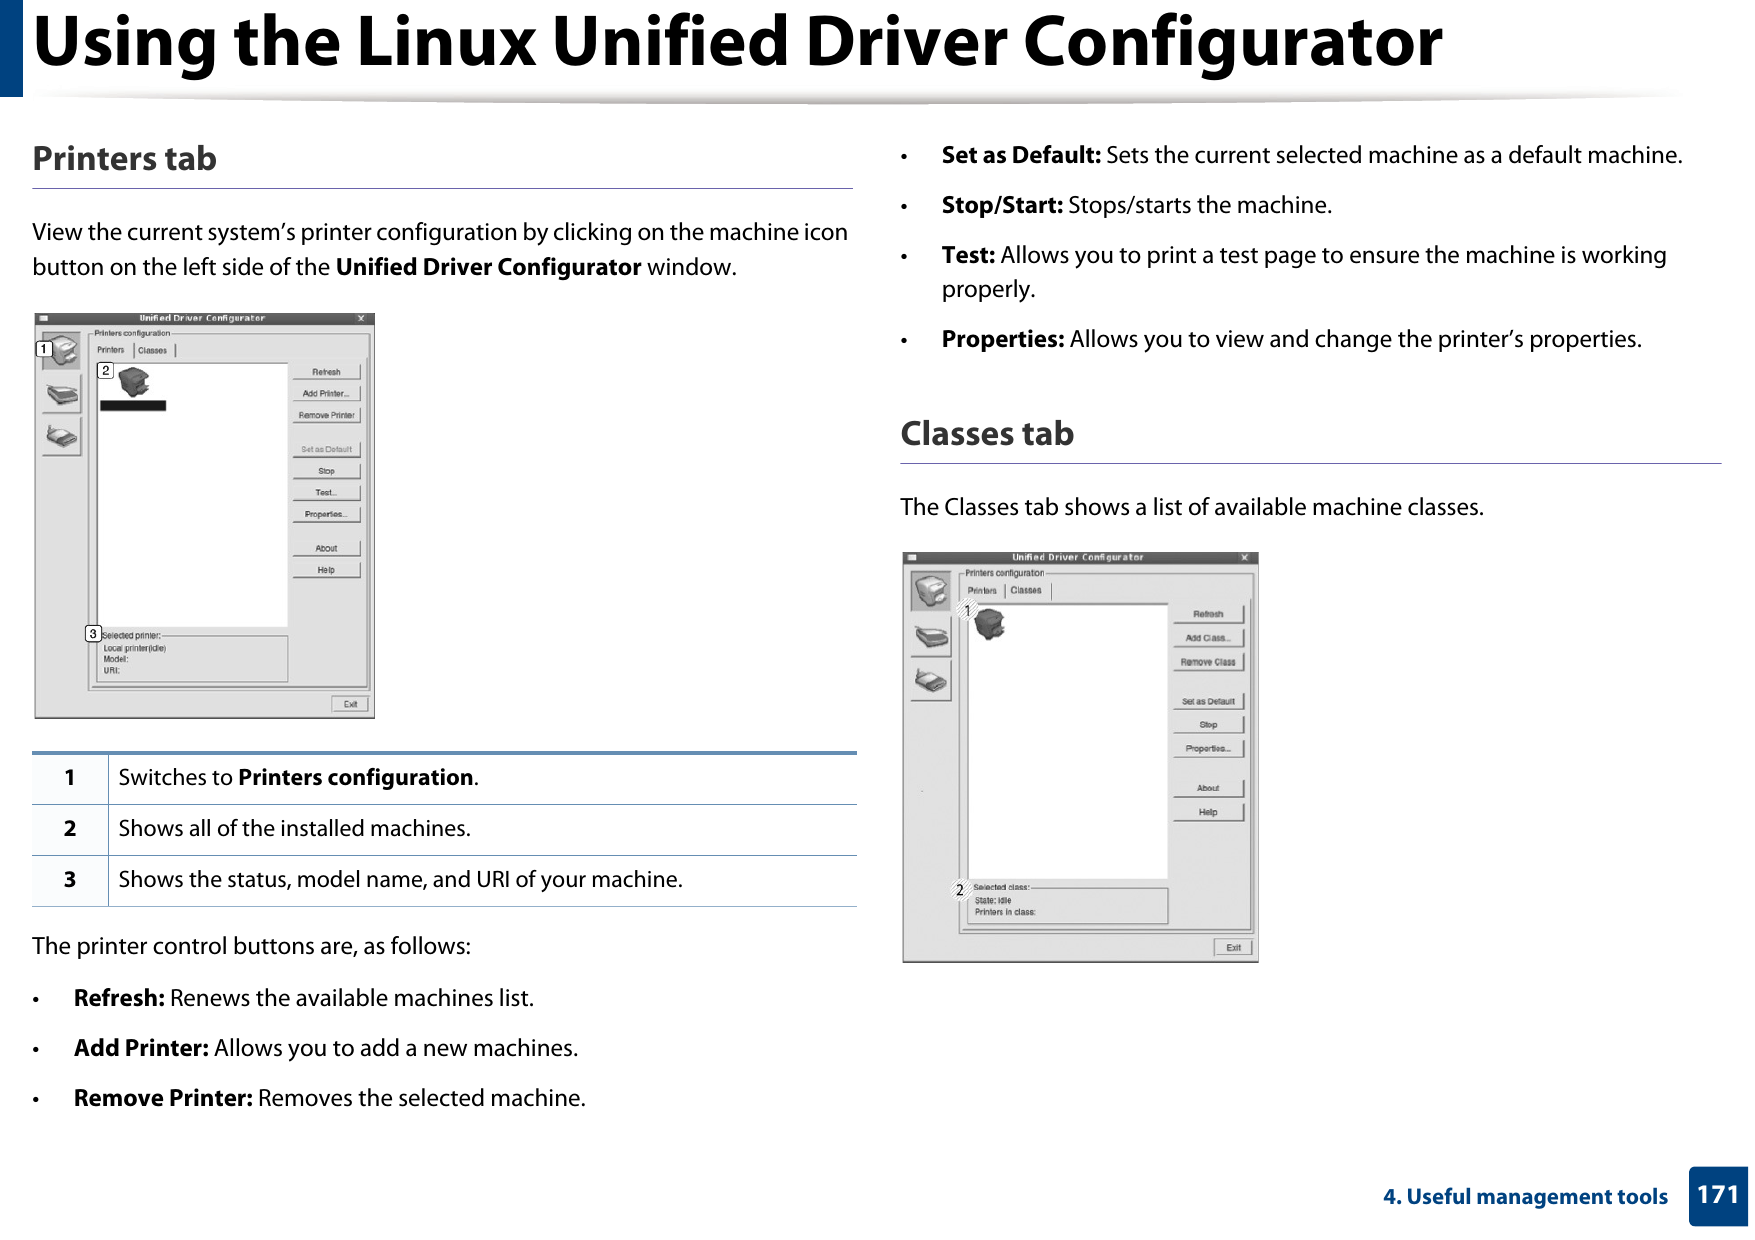 Using the Linux Unified Driver Configurator1714. Useful management toolsPrinters tabView the current system’s printer configuration by clicking on the machine icon button on the left side of the Unified Driver Configurator window.The printer control buttons are, as follows:•Refresh: Renews the available machines list.•Add Printer: Allows you to add a new machines.•Remove Printer: Removes the selected machine.•Set as Default: Sets the current selected machine as a default machine.•Stop/Start: Stops/starts the machine.•Test: Allows you to print a test page to ensure the machine is working properly.•Properties: Allows you to view and change the printer’s properties. Classes tabThe Classes tab shows a list of available machine classes.1Switches to Printers configuration.2Shows all of the installed machines.3Shows the status, model name, and URI of your machine.